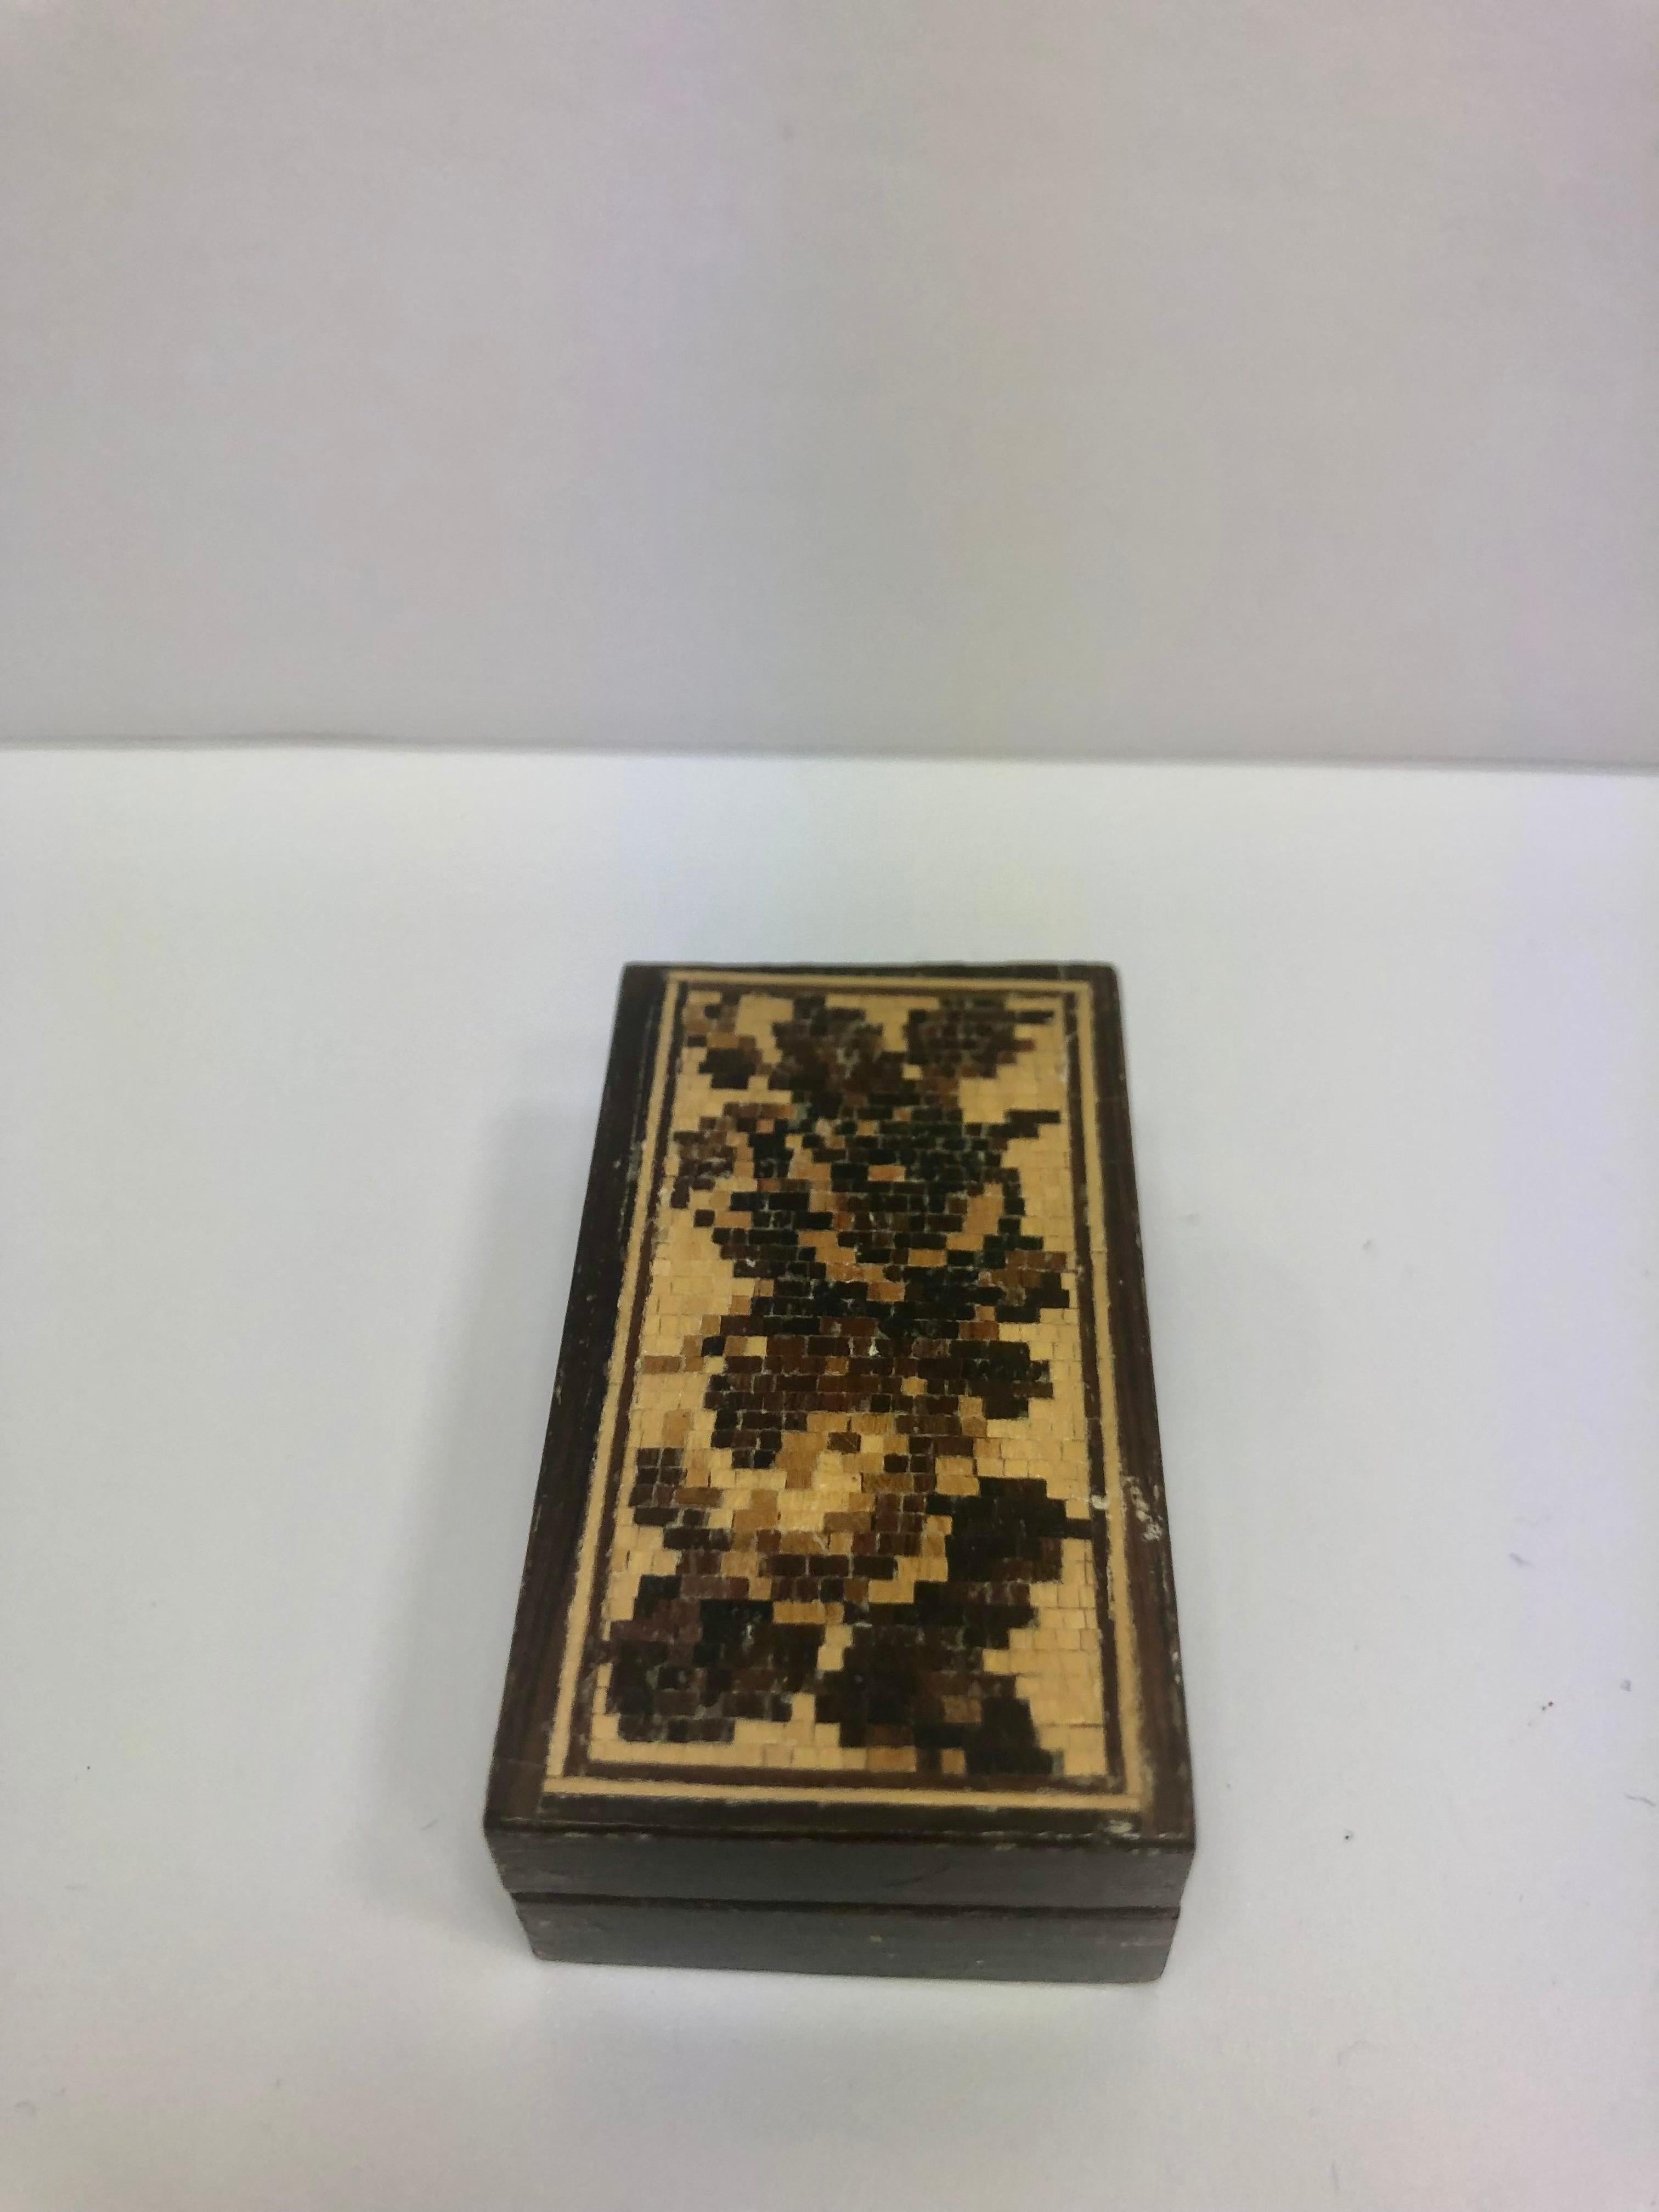 Tunbridge wooden trinket box made in England in the 1870s. Intricate floral design. Tunbridge wooden trinket box made in England in the 1870s. Tunbridge ware is a form of decoratively inlaid woodwork, typically in the form of boxes, that is